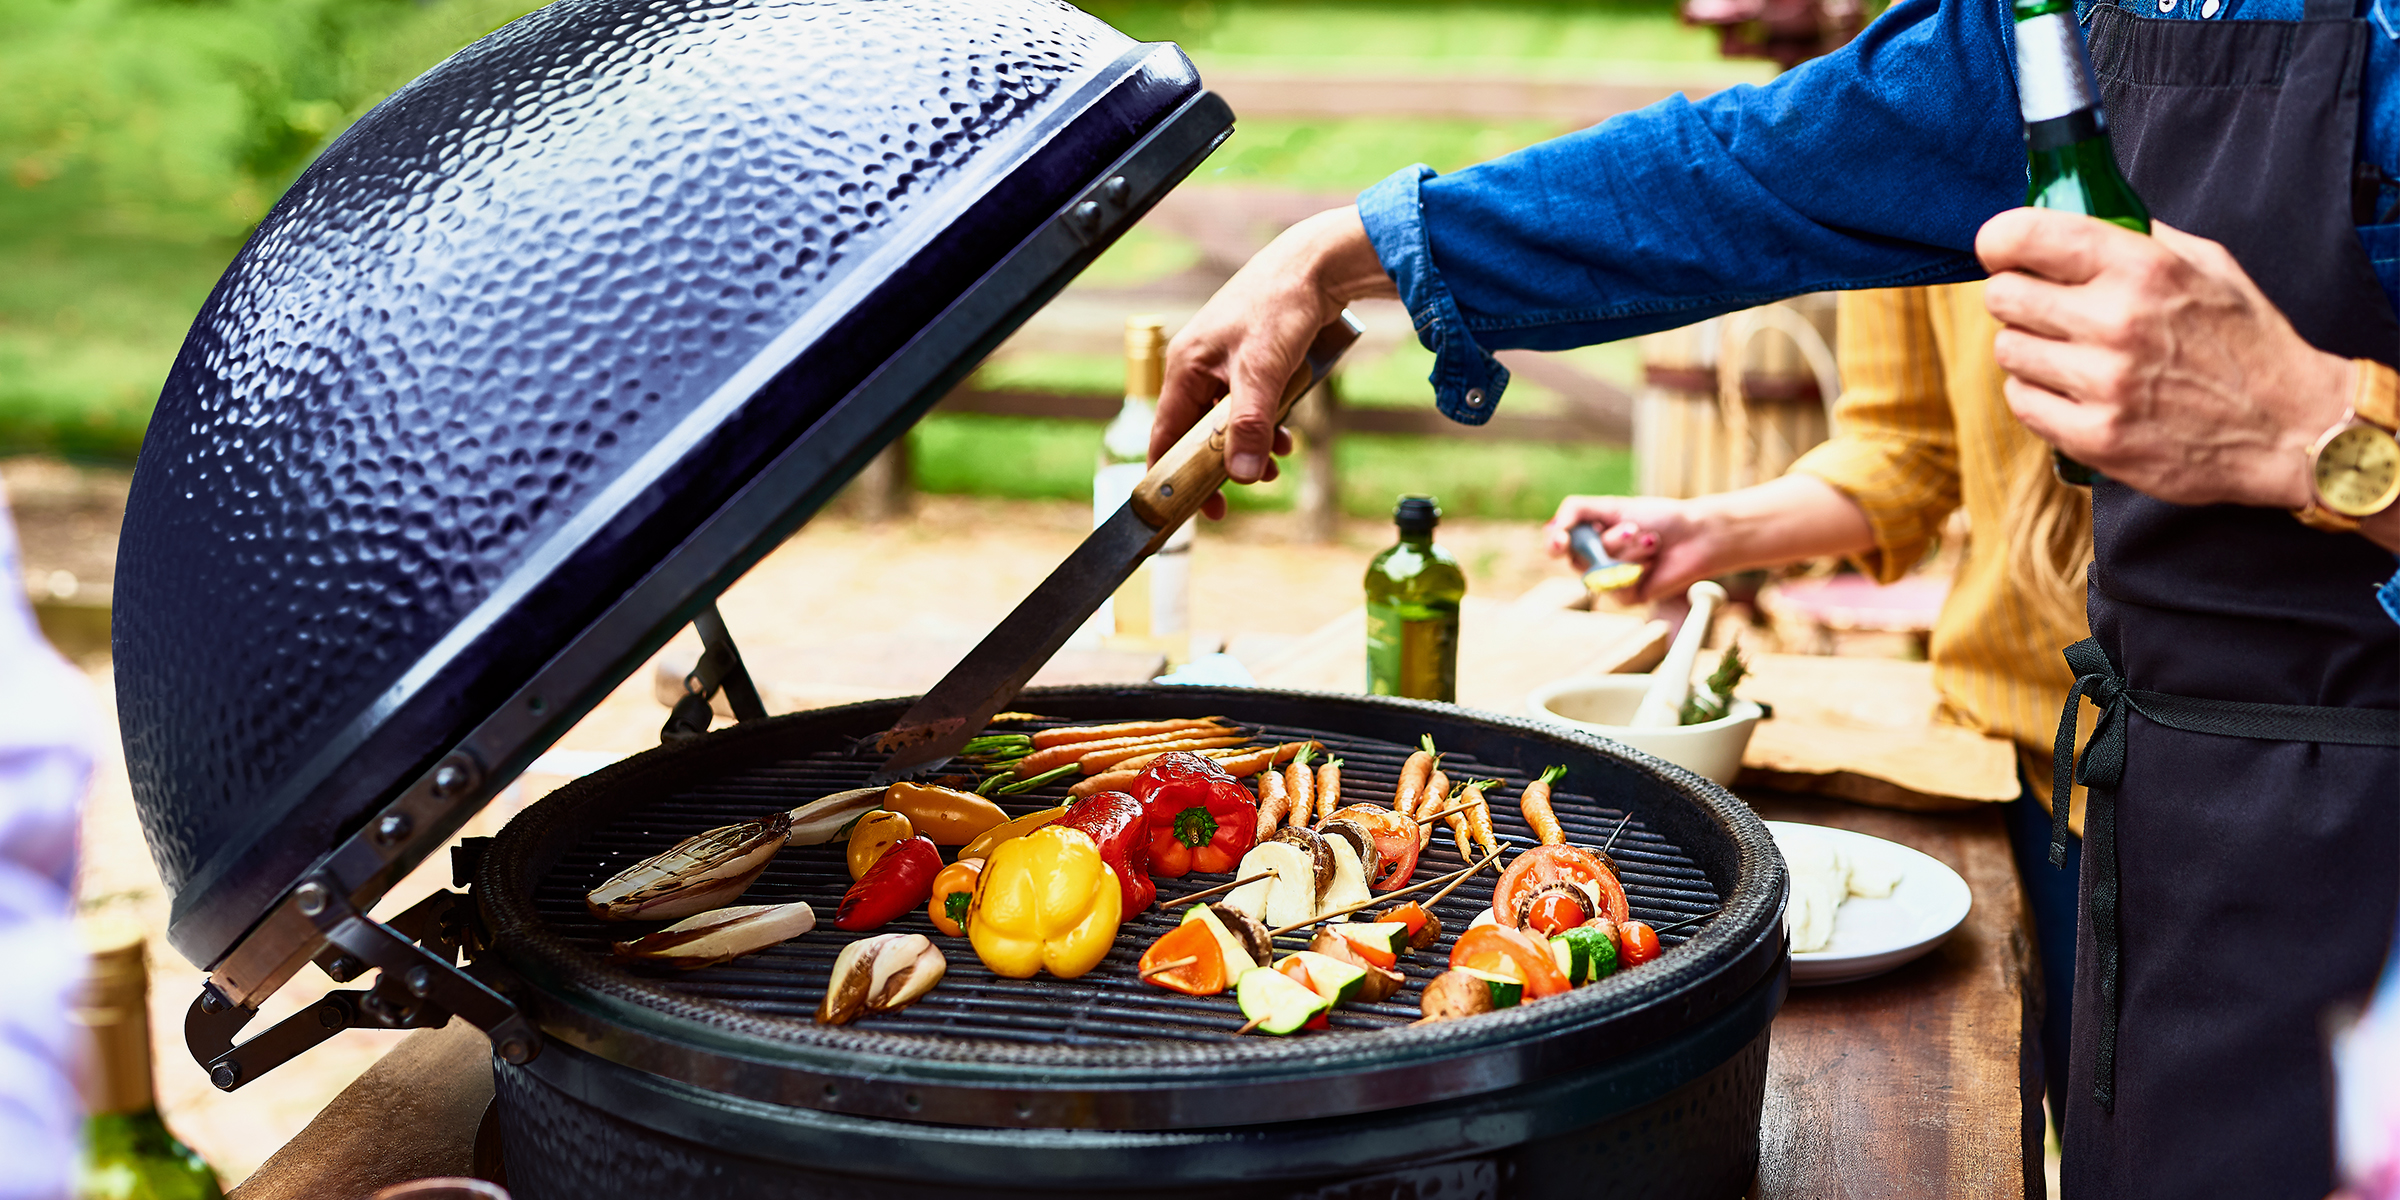 THE BEST HELPERS FOR SMOKING AND GRILLING: SMOKERS ACCESSORIES